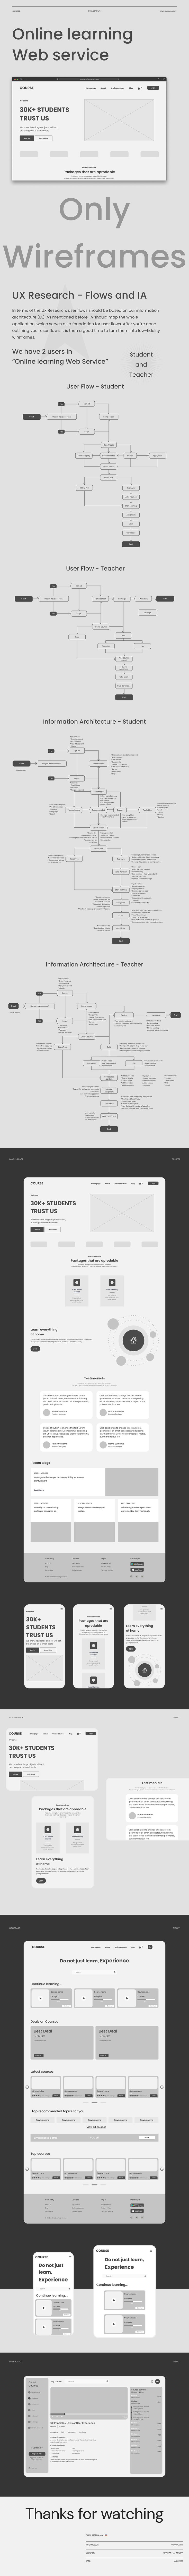 research user experience ux Website